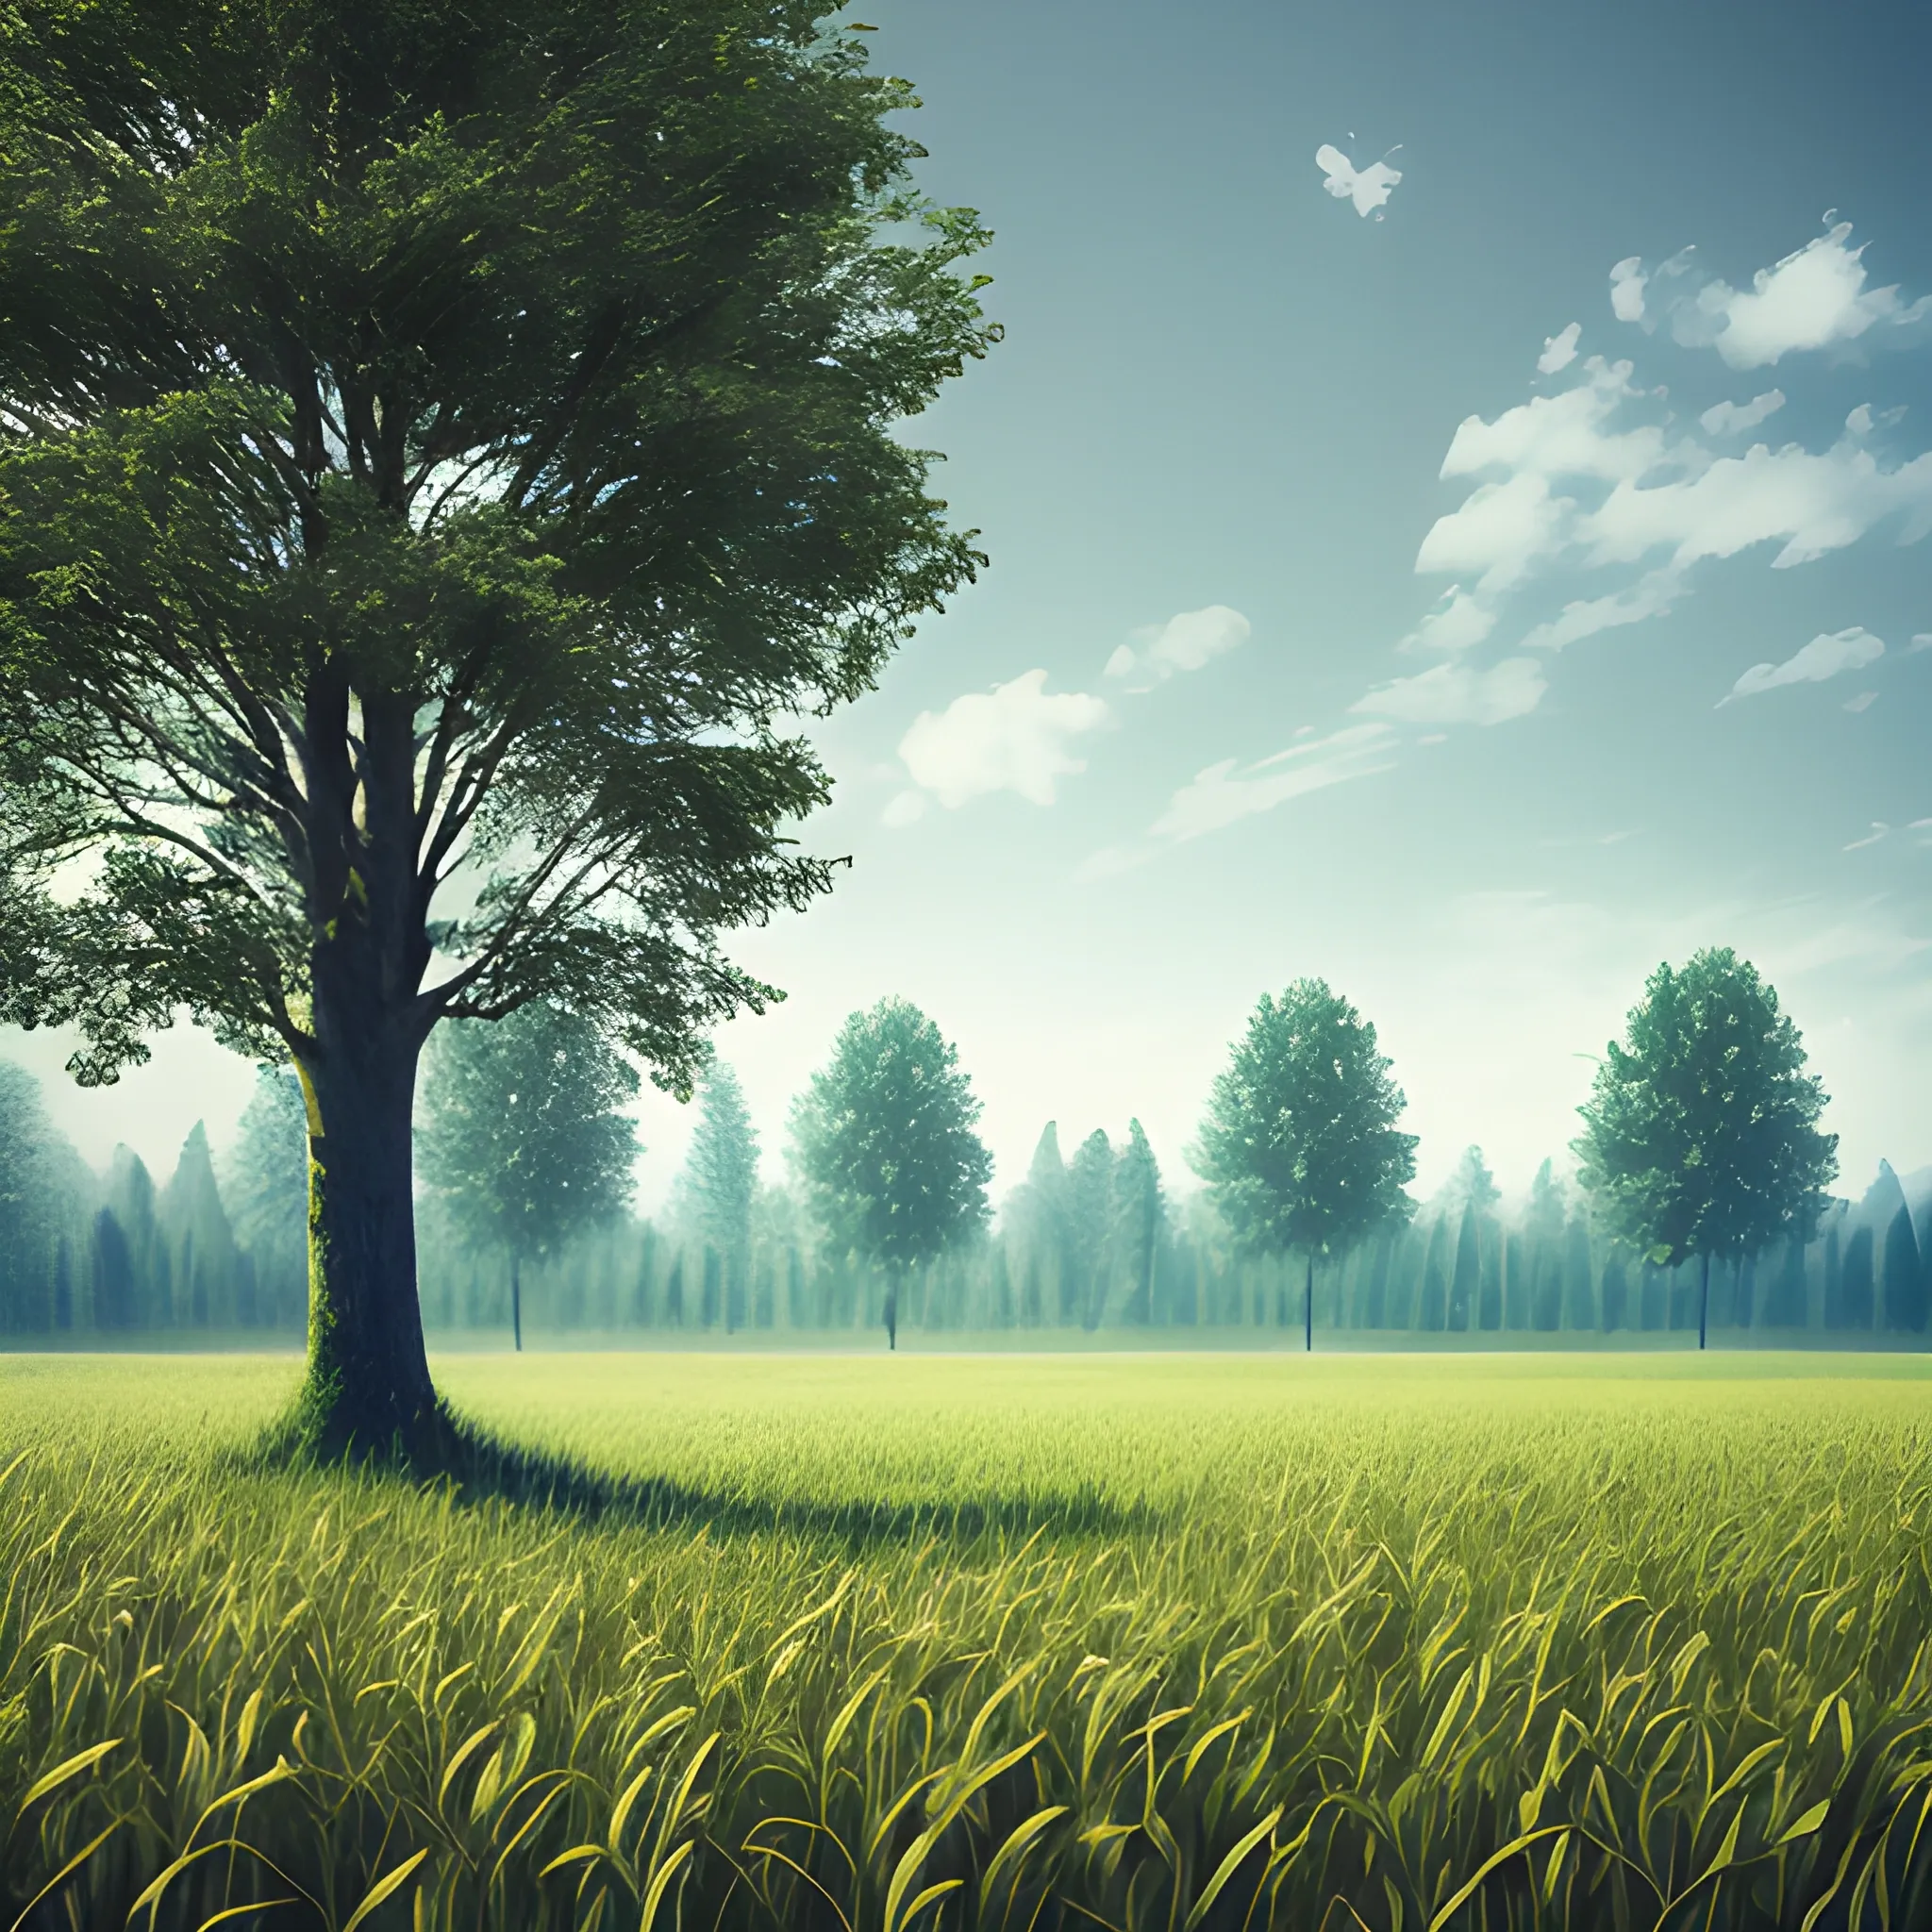 
Background trees, field, for photos (high quality, very realistic)